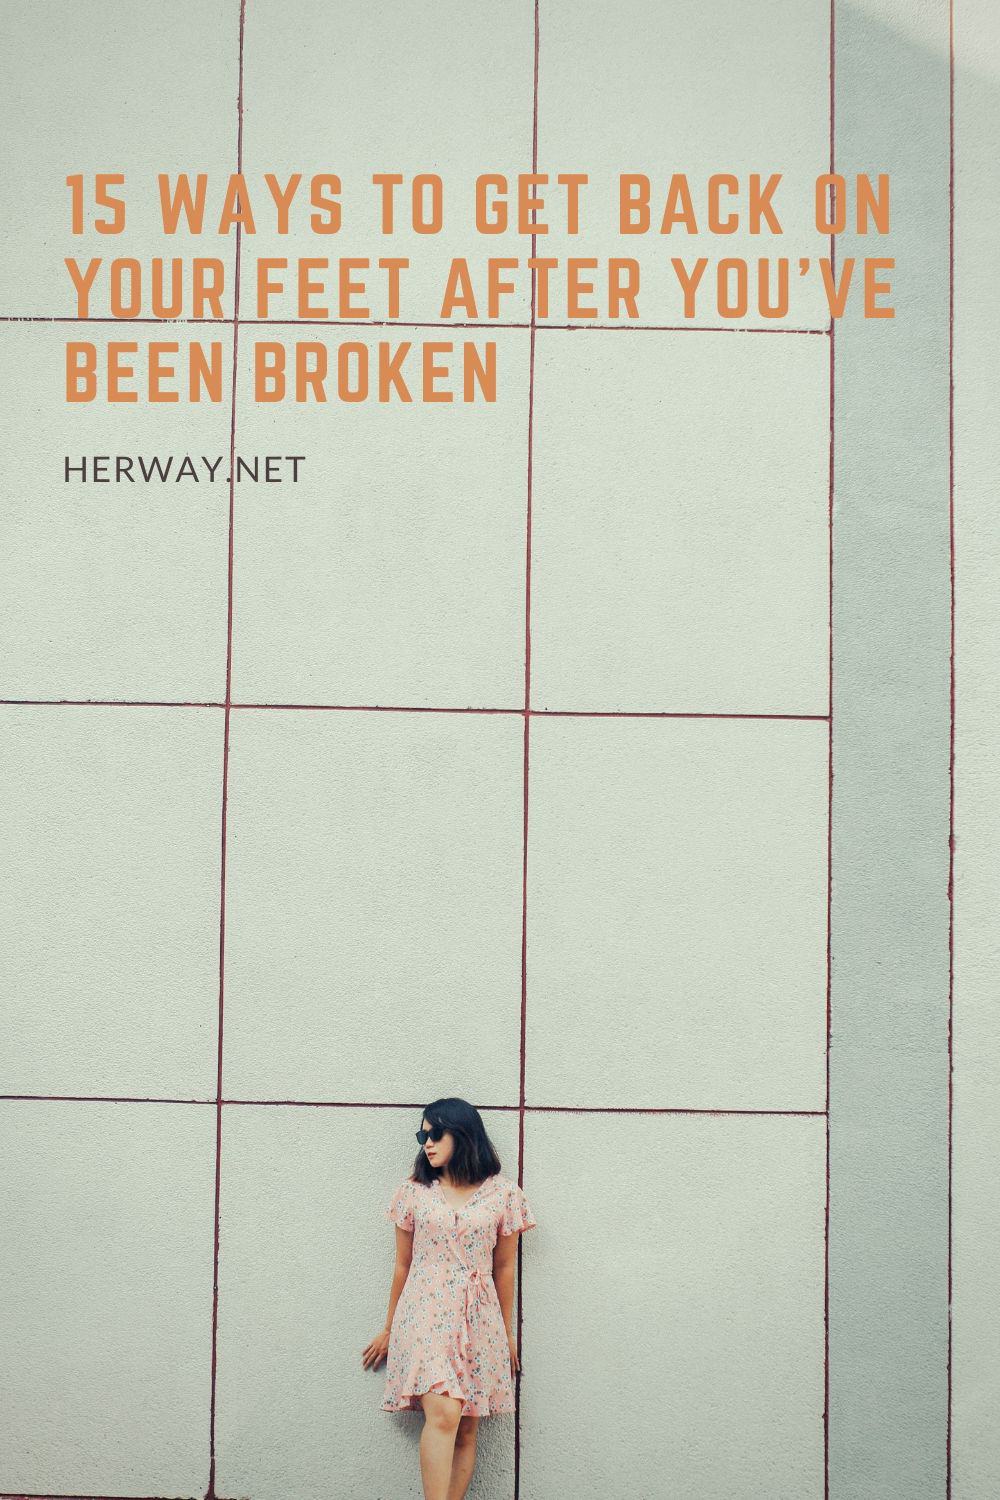 15 WAYS TO GET BACK ON YOUR FEET AFTER YOU’VE BEEN BROKEN